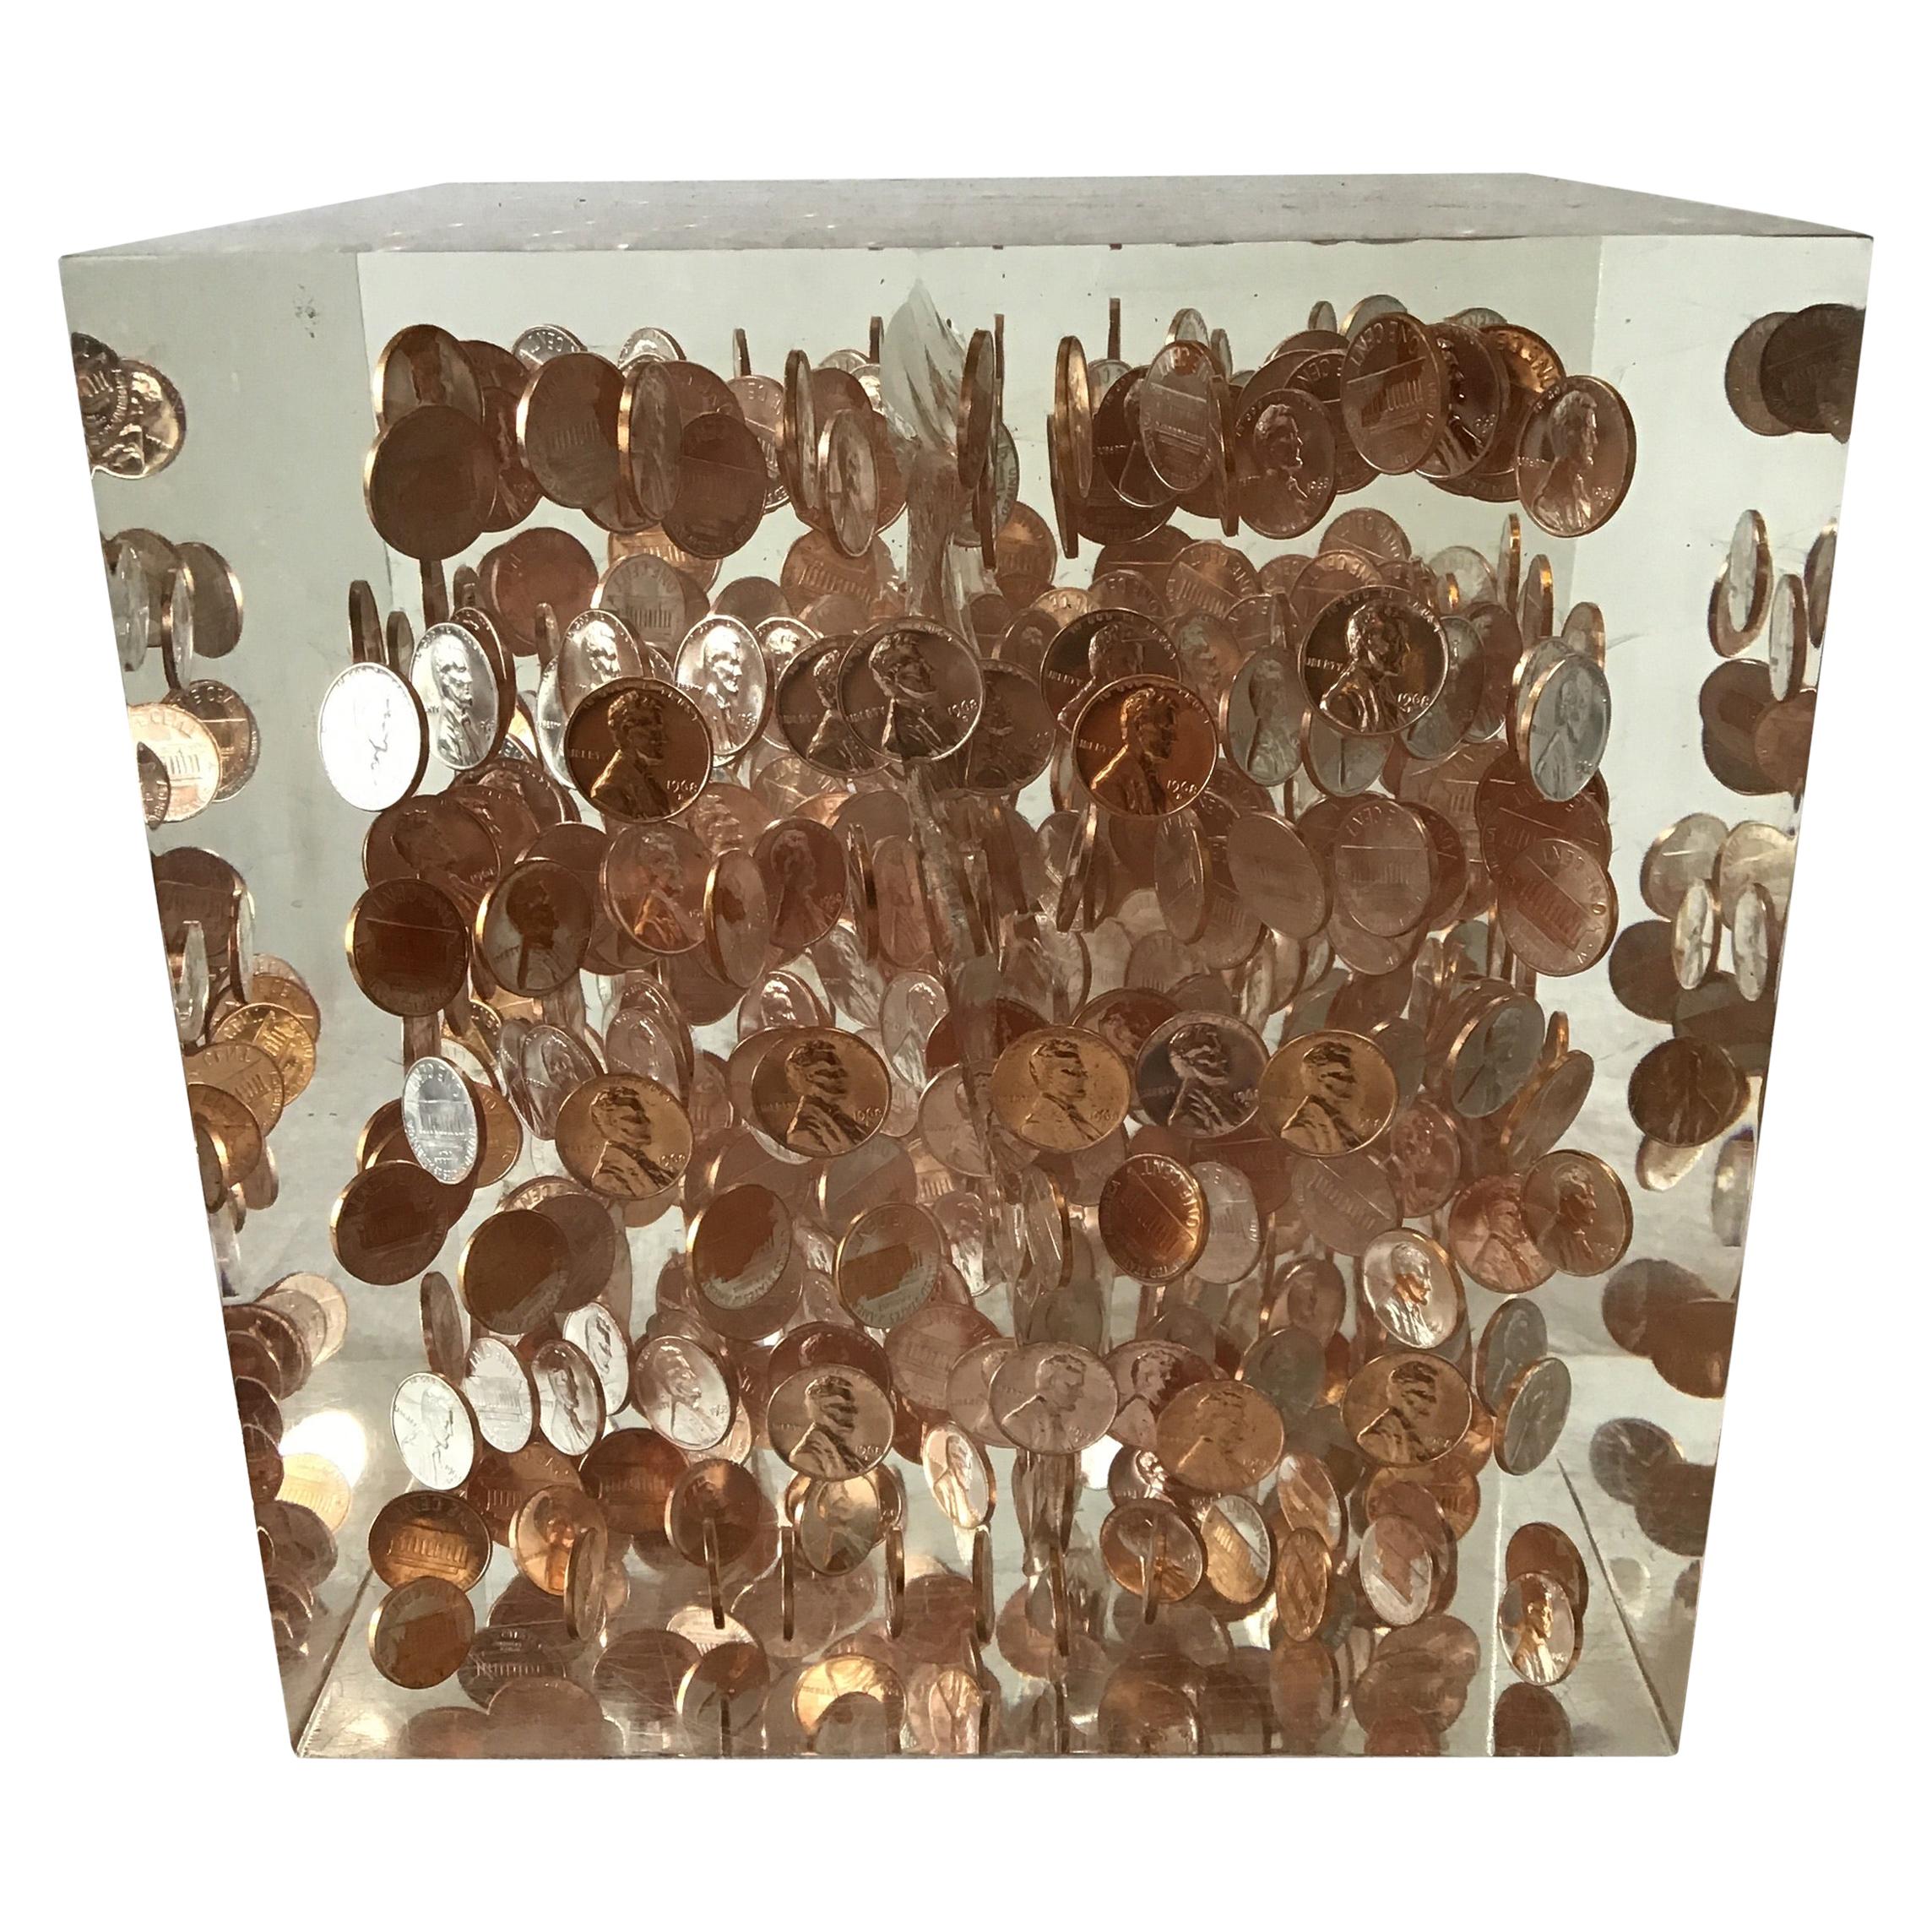 Large Lucite Cube of 1968 Pennies